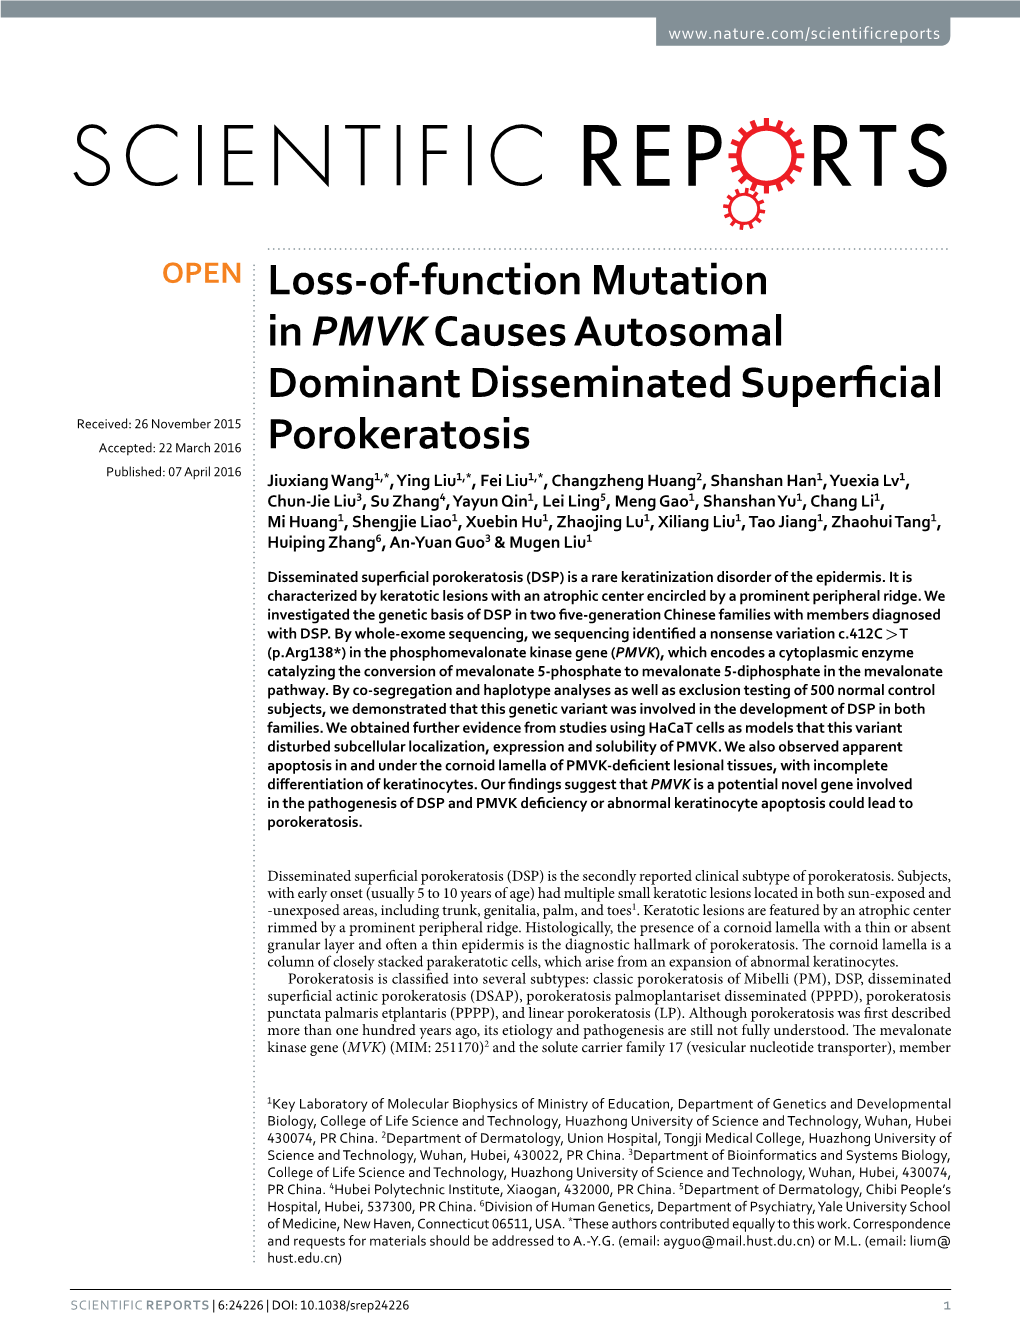 Loss-Of-Function Mutation in PMVK Causes Autosomal Dominant